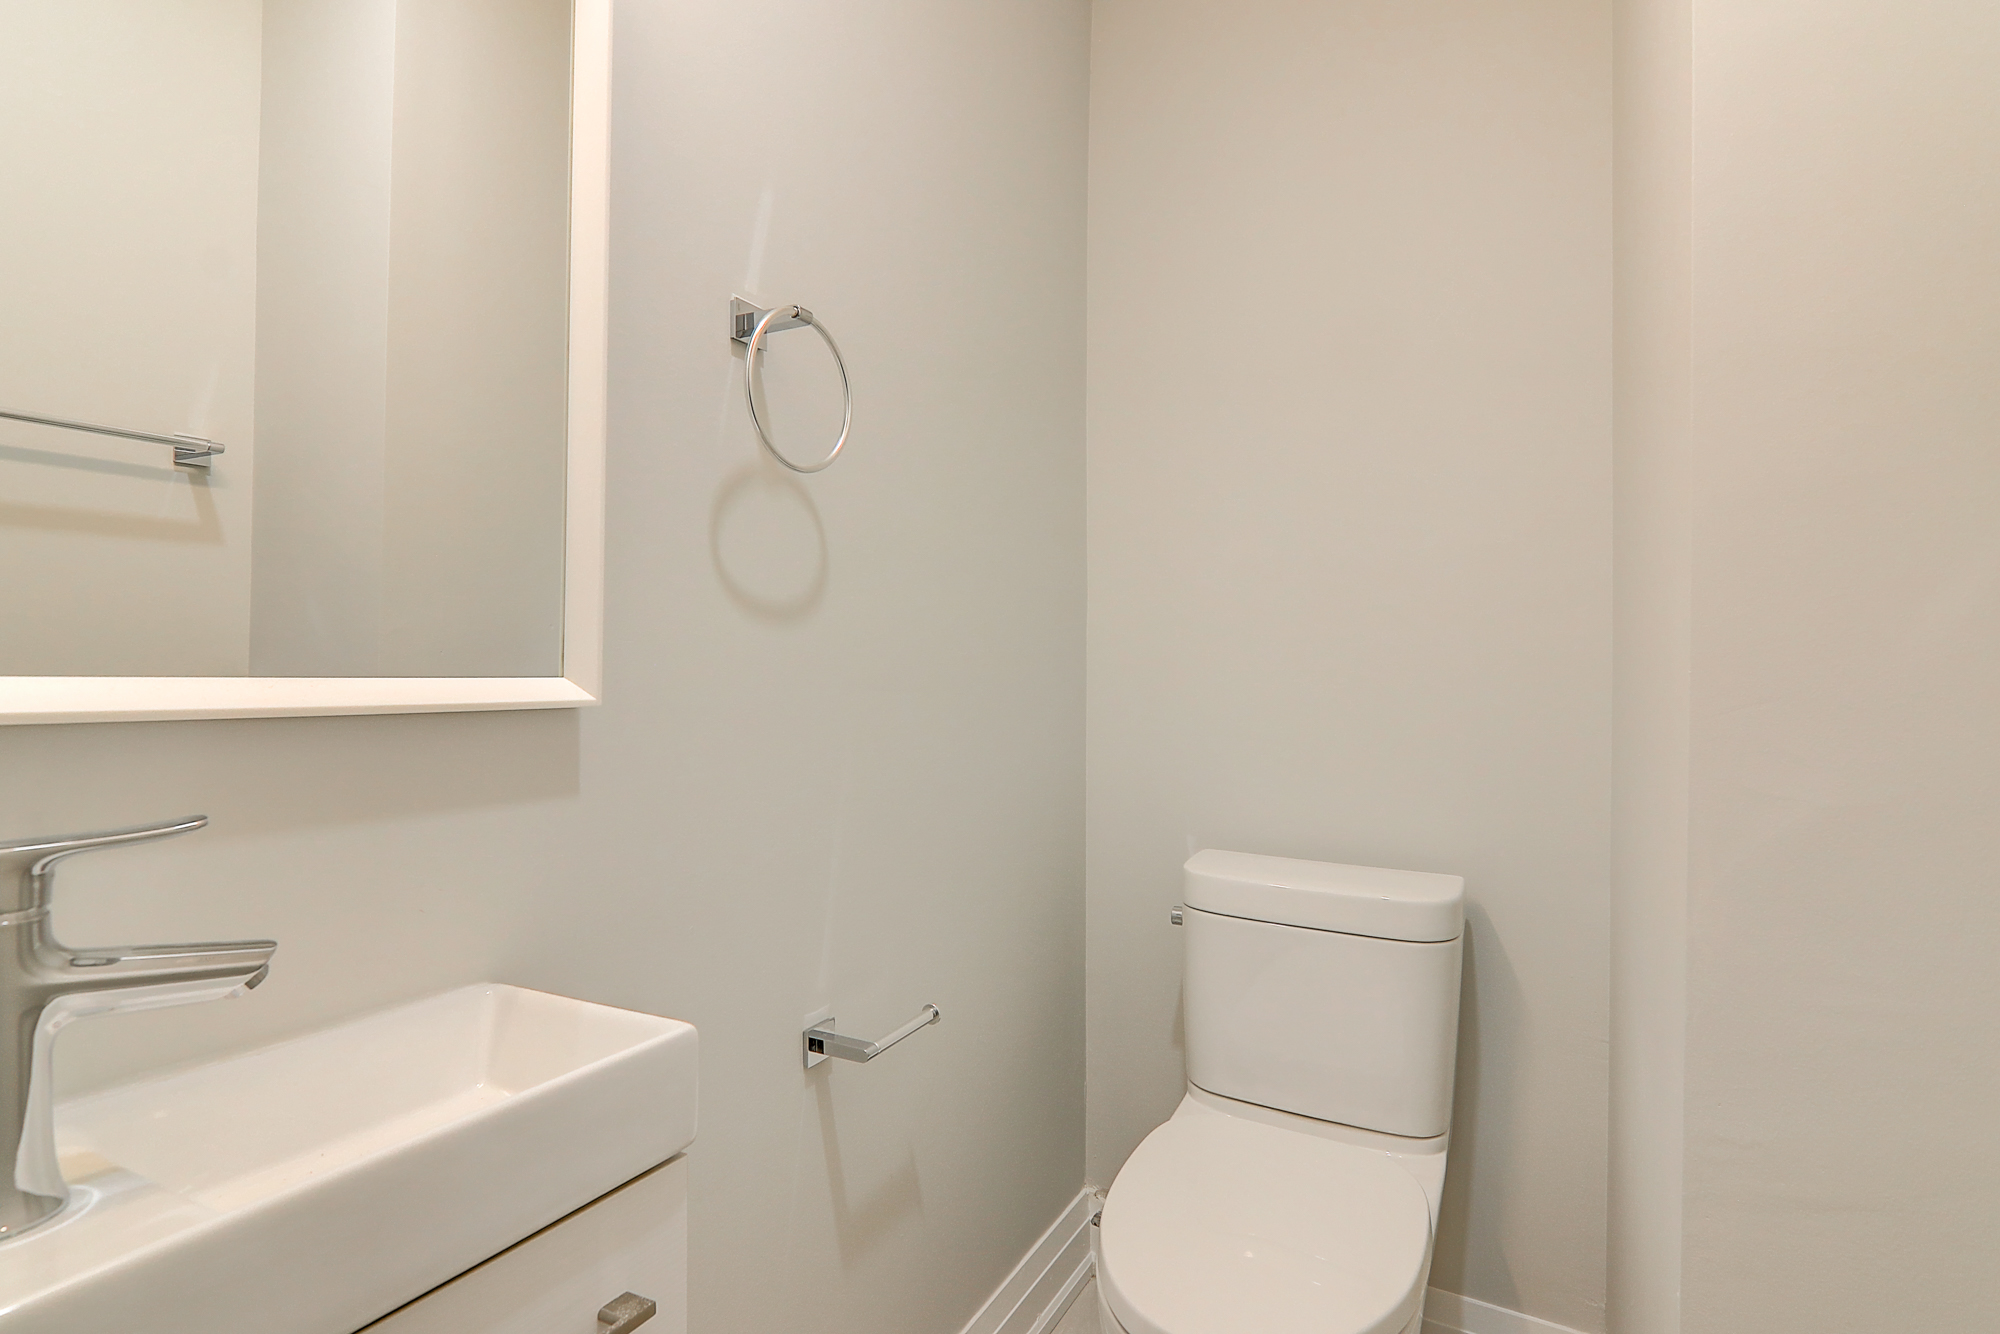 A white bathroom with a toilet and sink